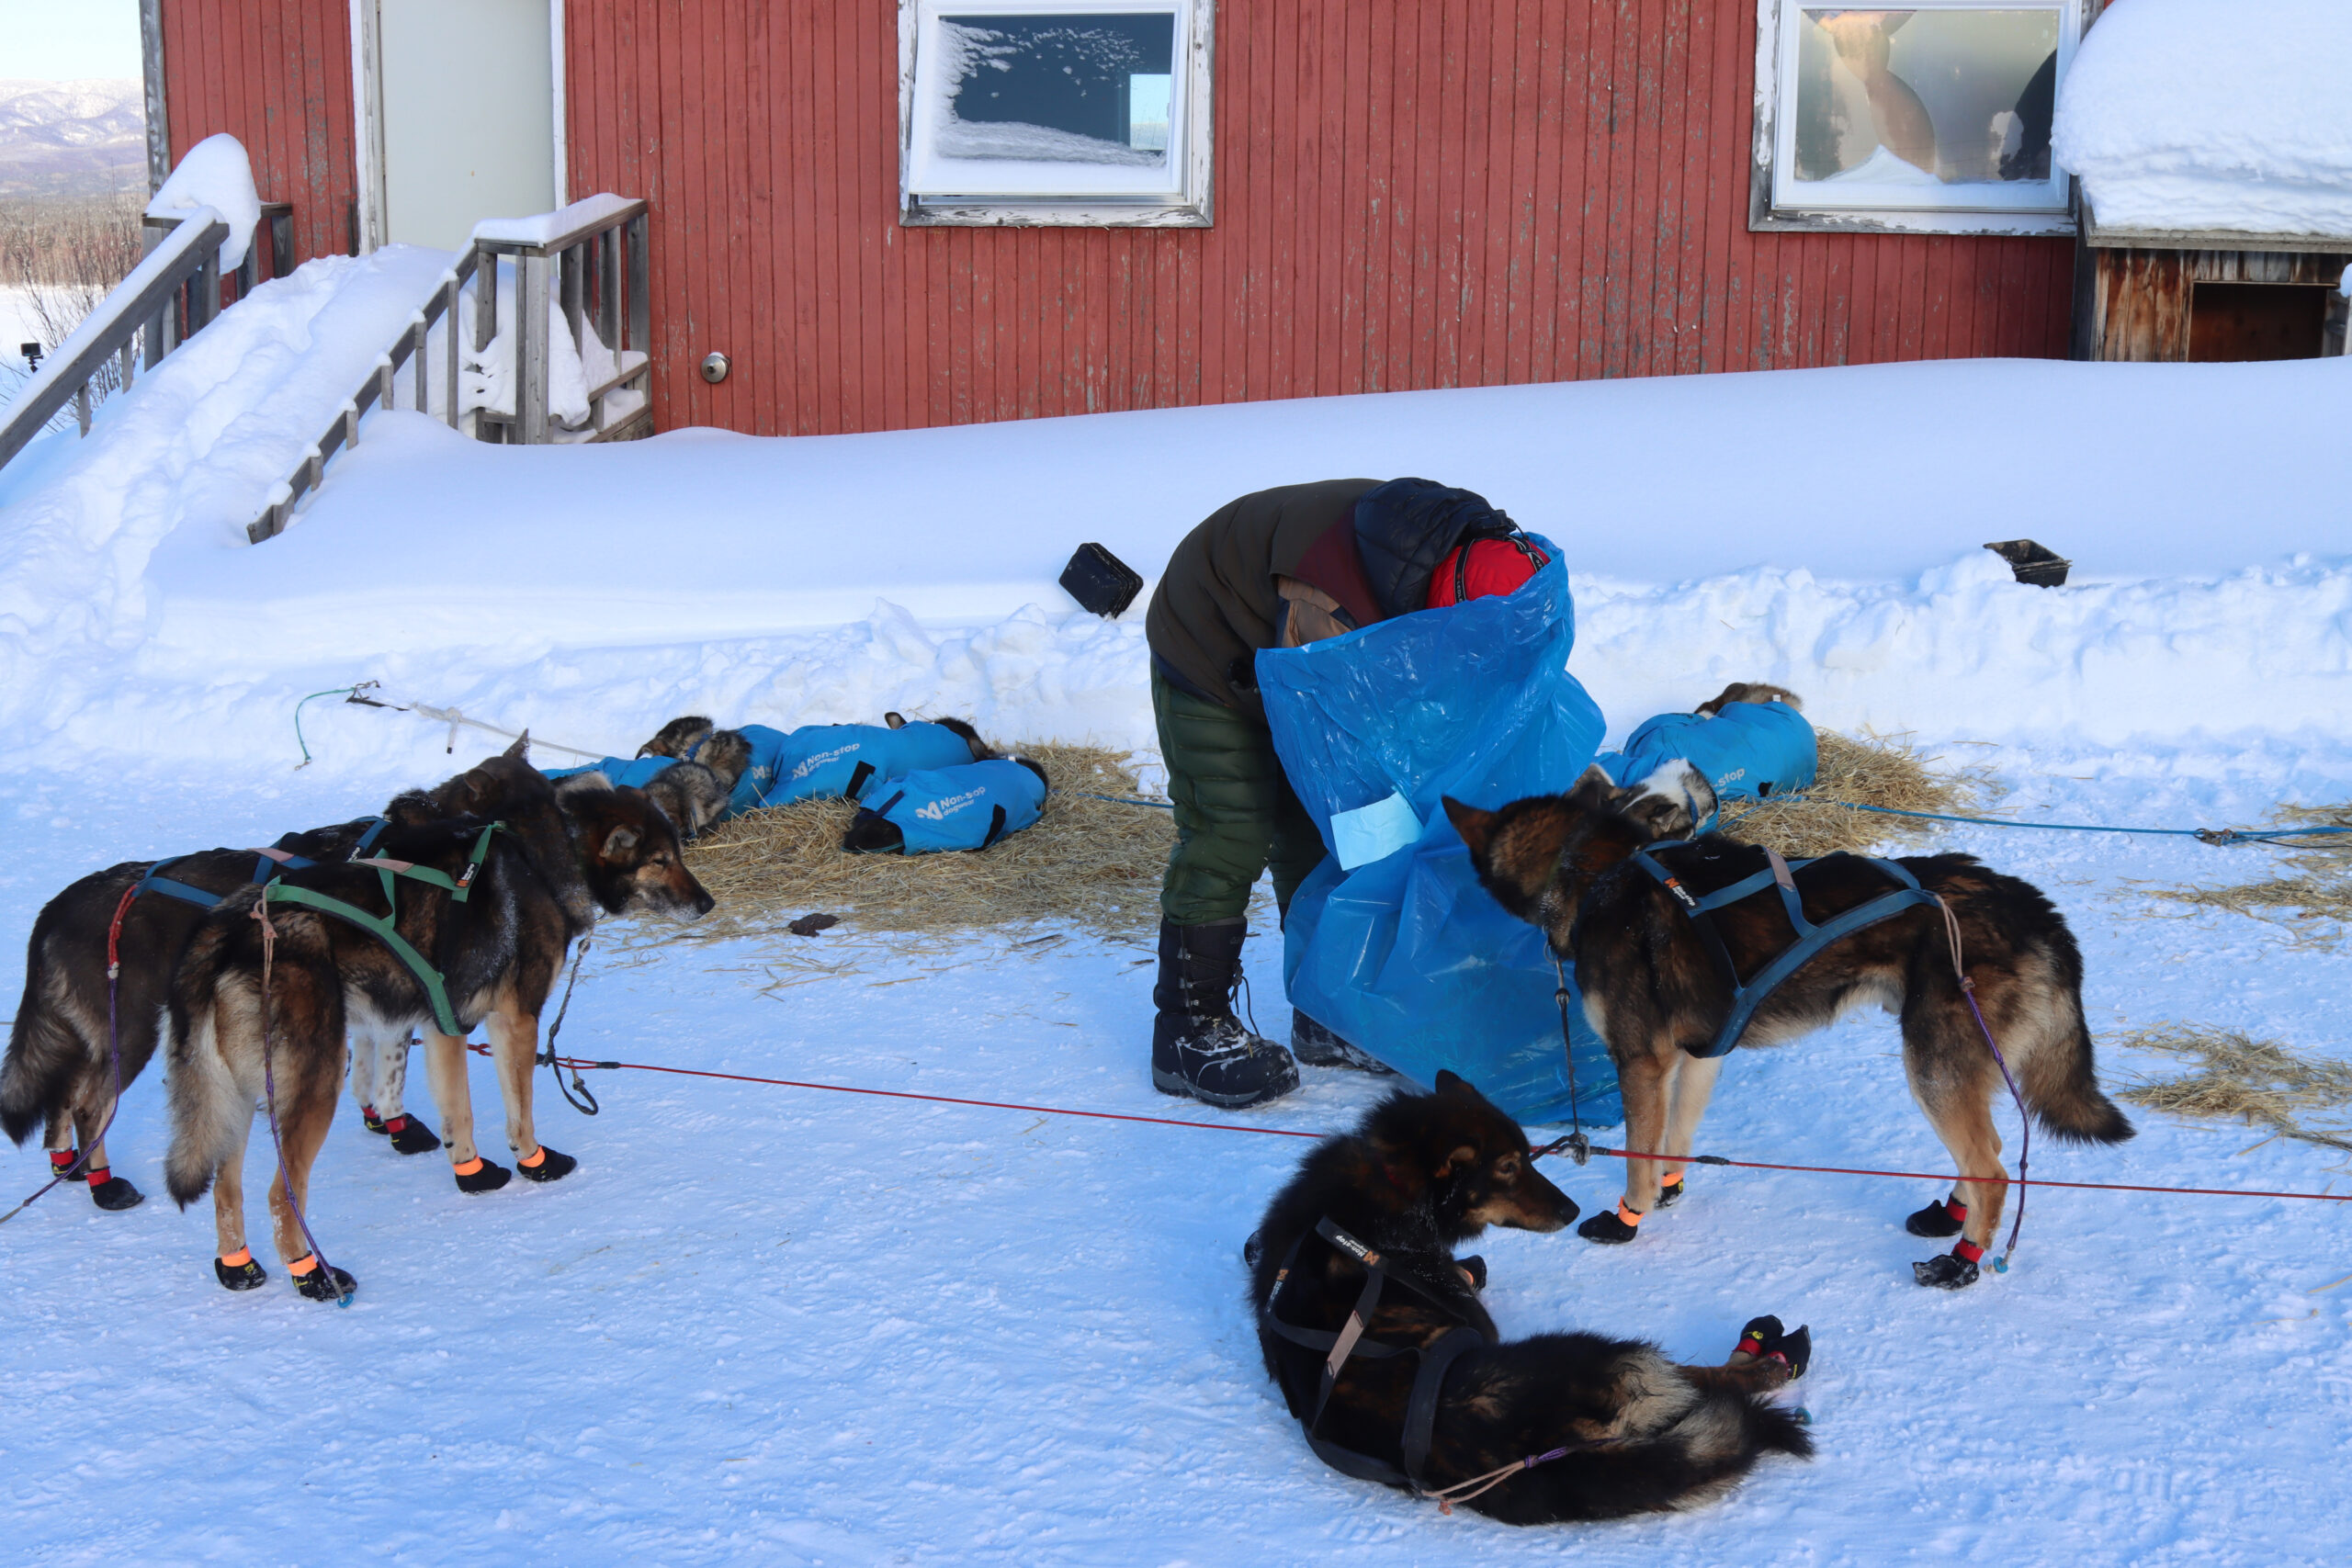 a musher pulls straw out of a bag for his dogs